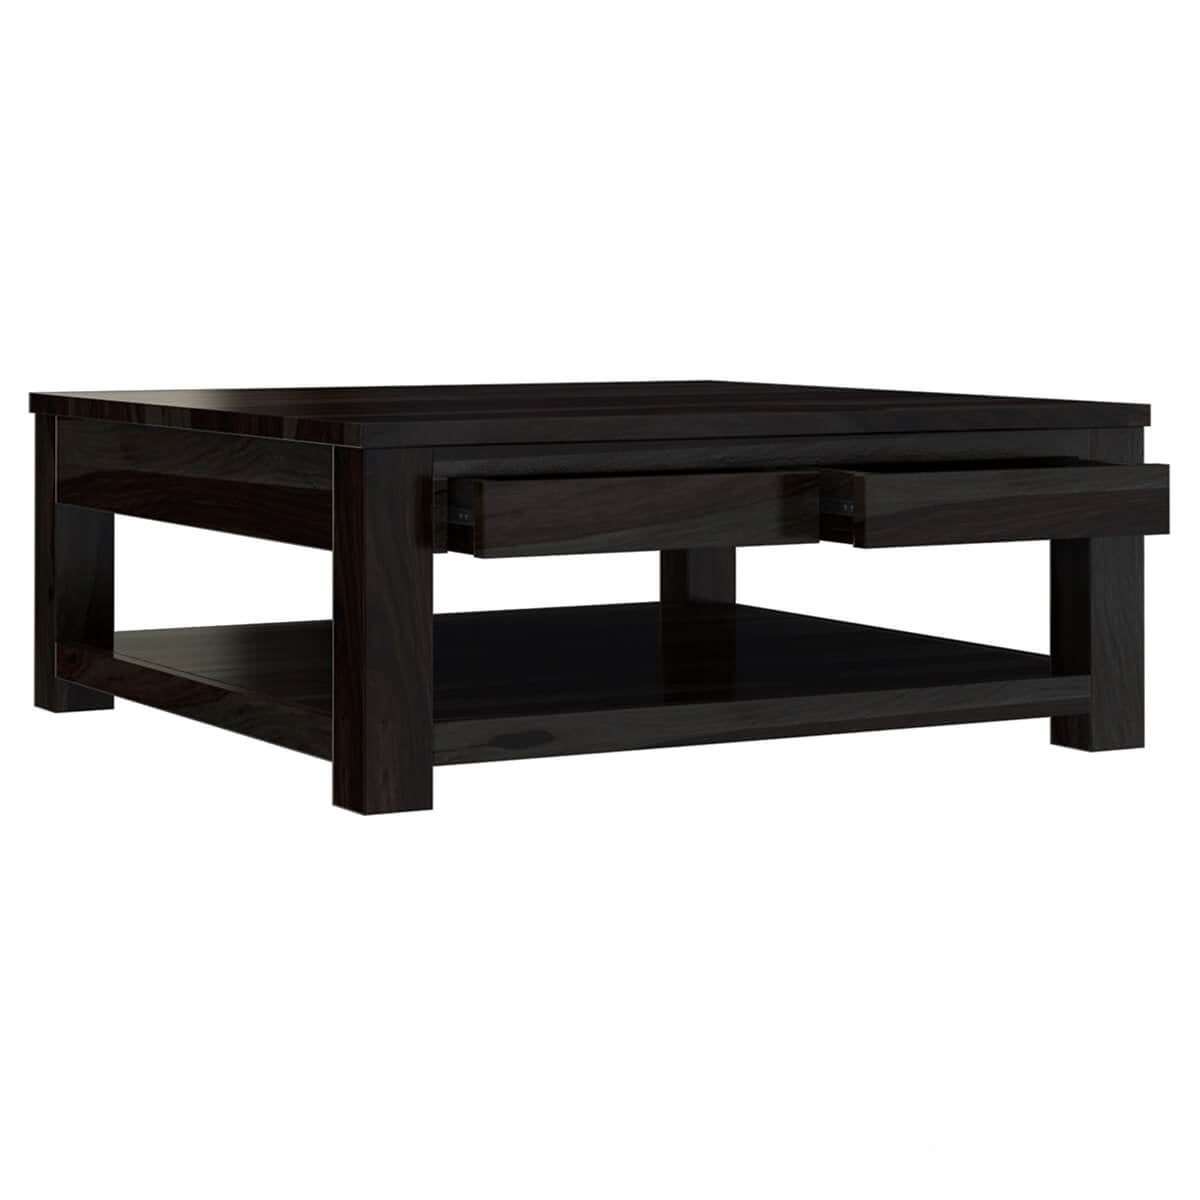 Dresden Solid Wood Contemporary Large Square Coffee Table